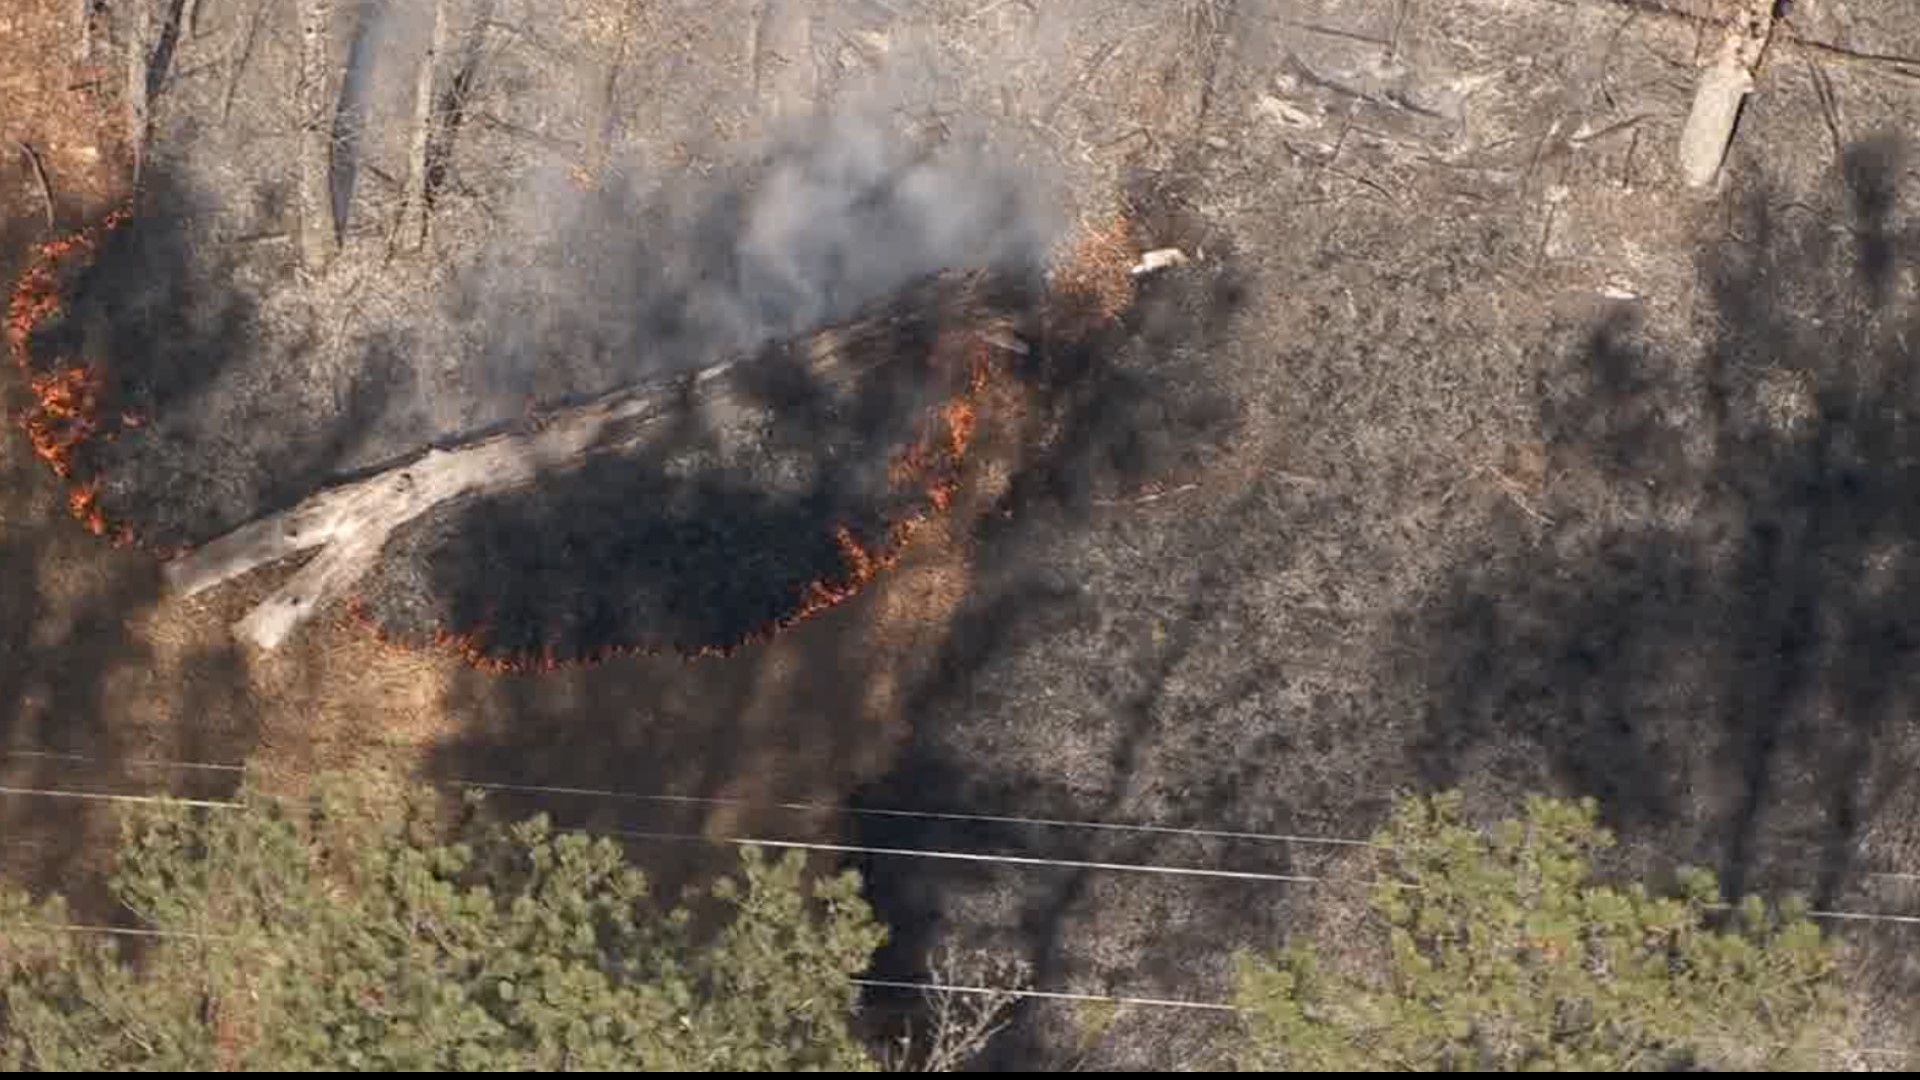 Smoke is seen billowing for miles after a large grass fire broke out near Stone Mountain Park on Monday afternoon.